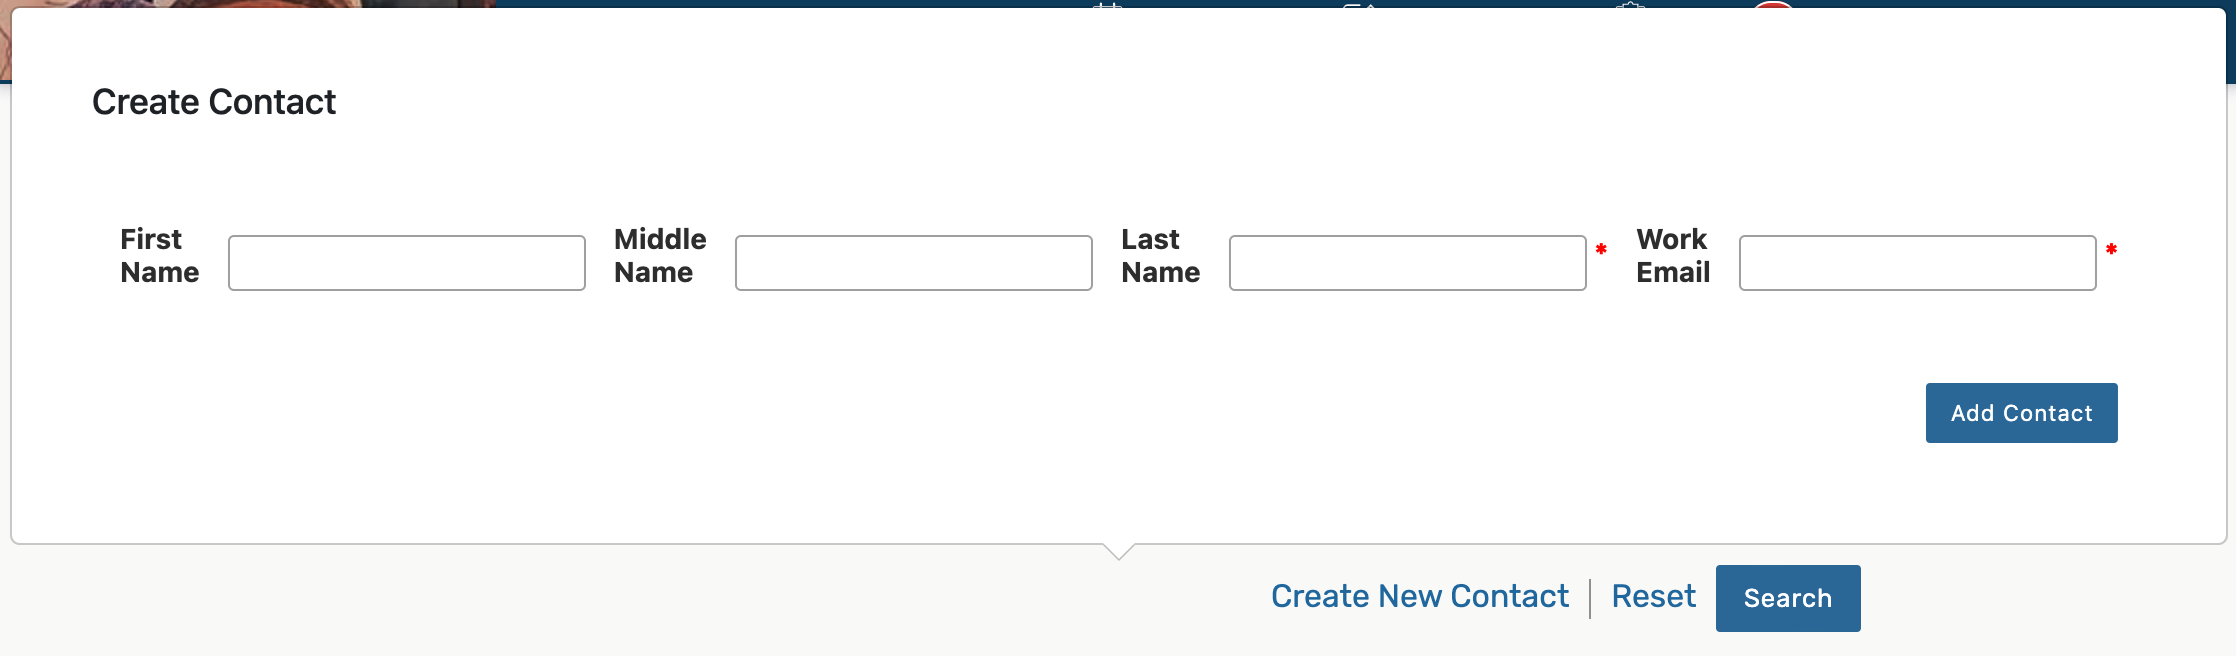 Create New Contact form